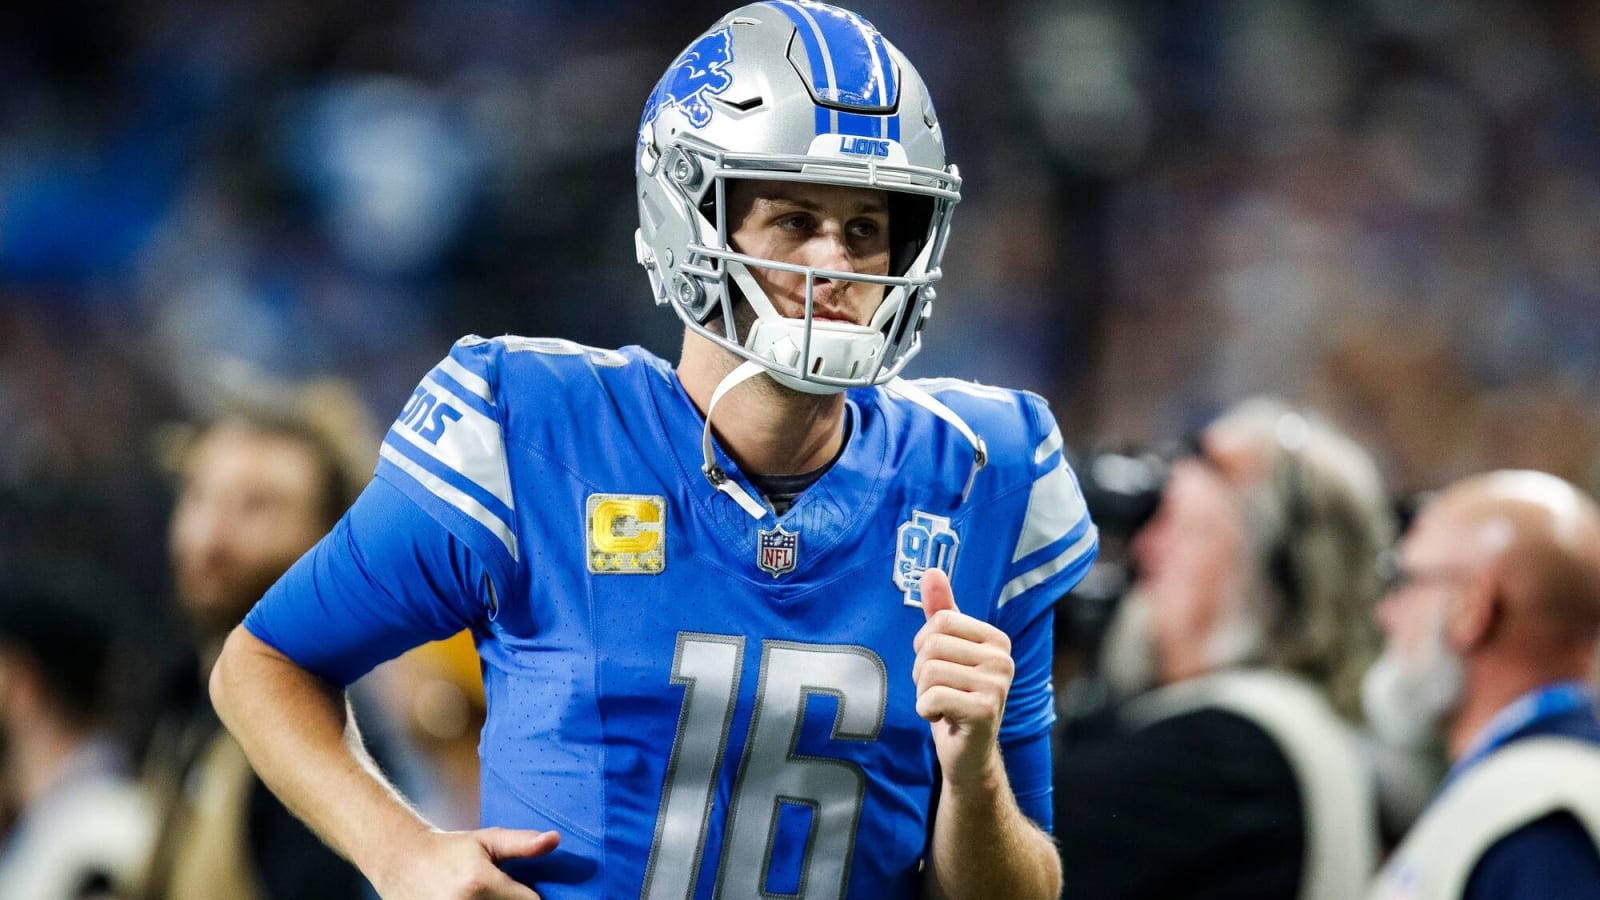 Lions Come Back To Defeat Bears In Thrilling Fashion